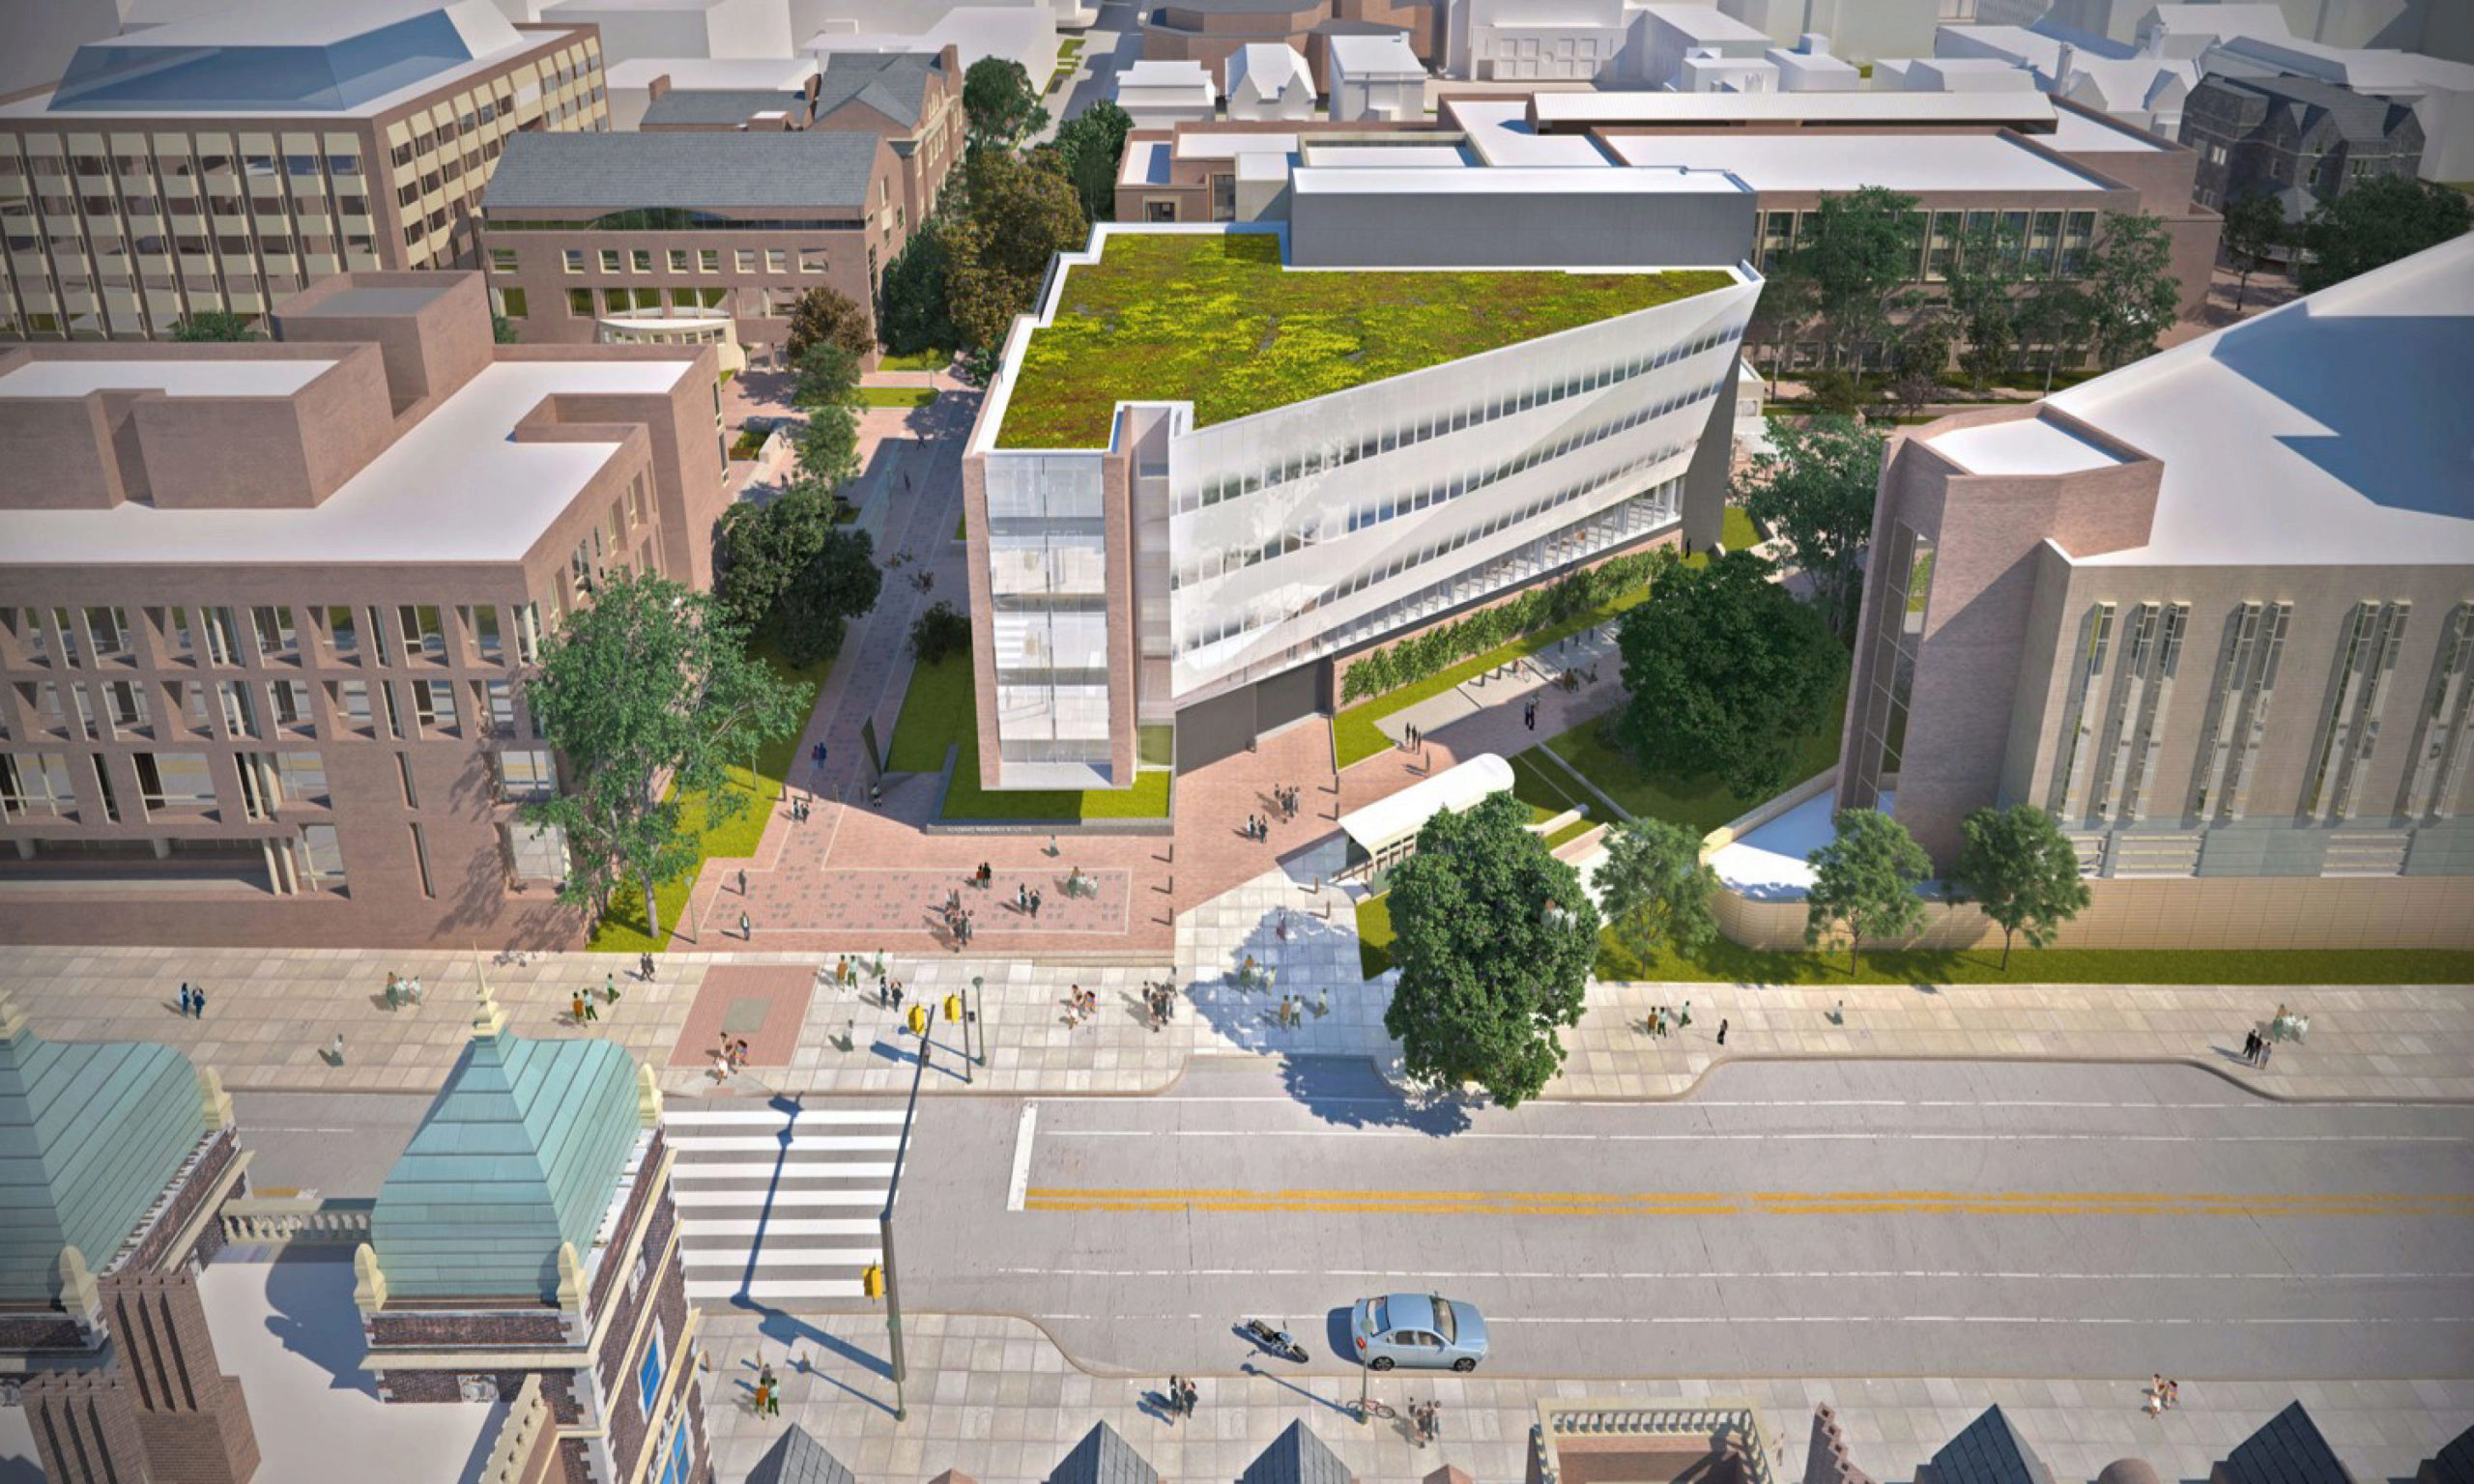 Wharton Academic Research Building - Aerial View